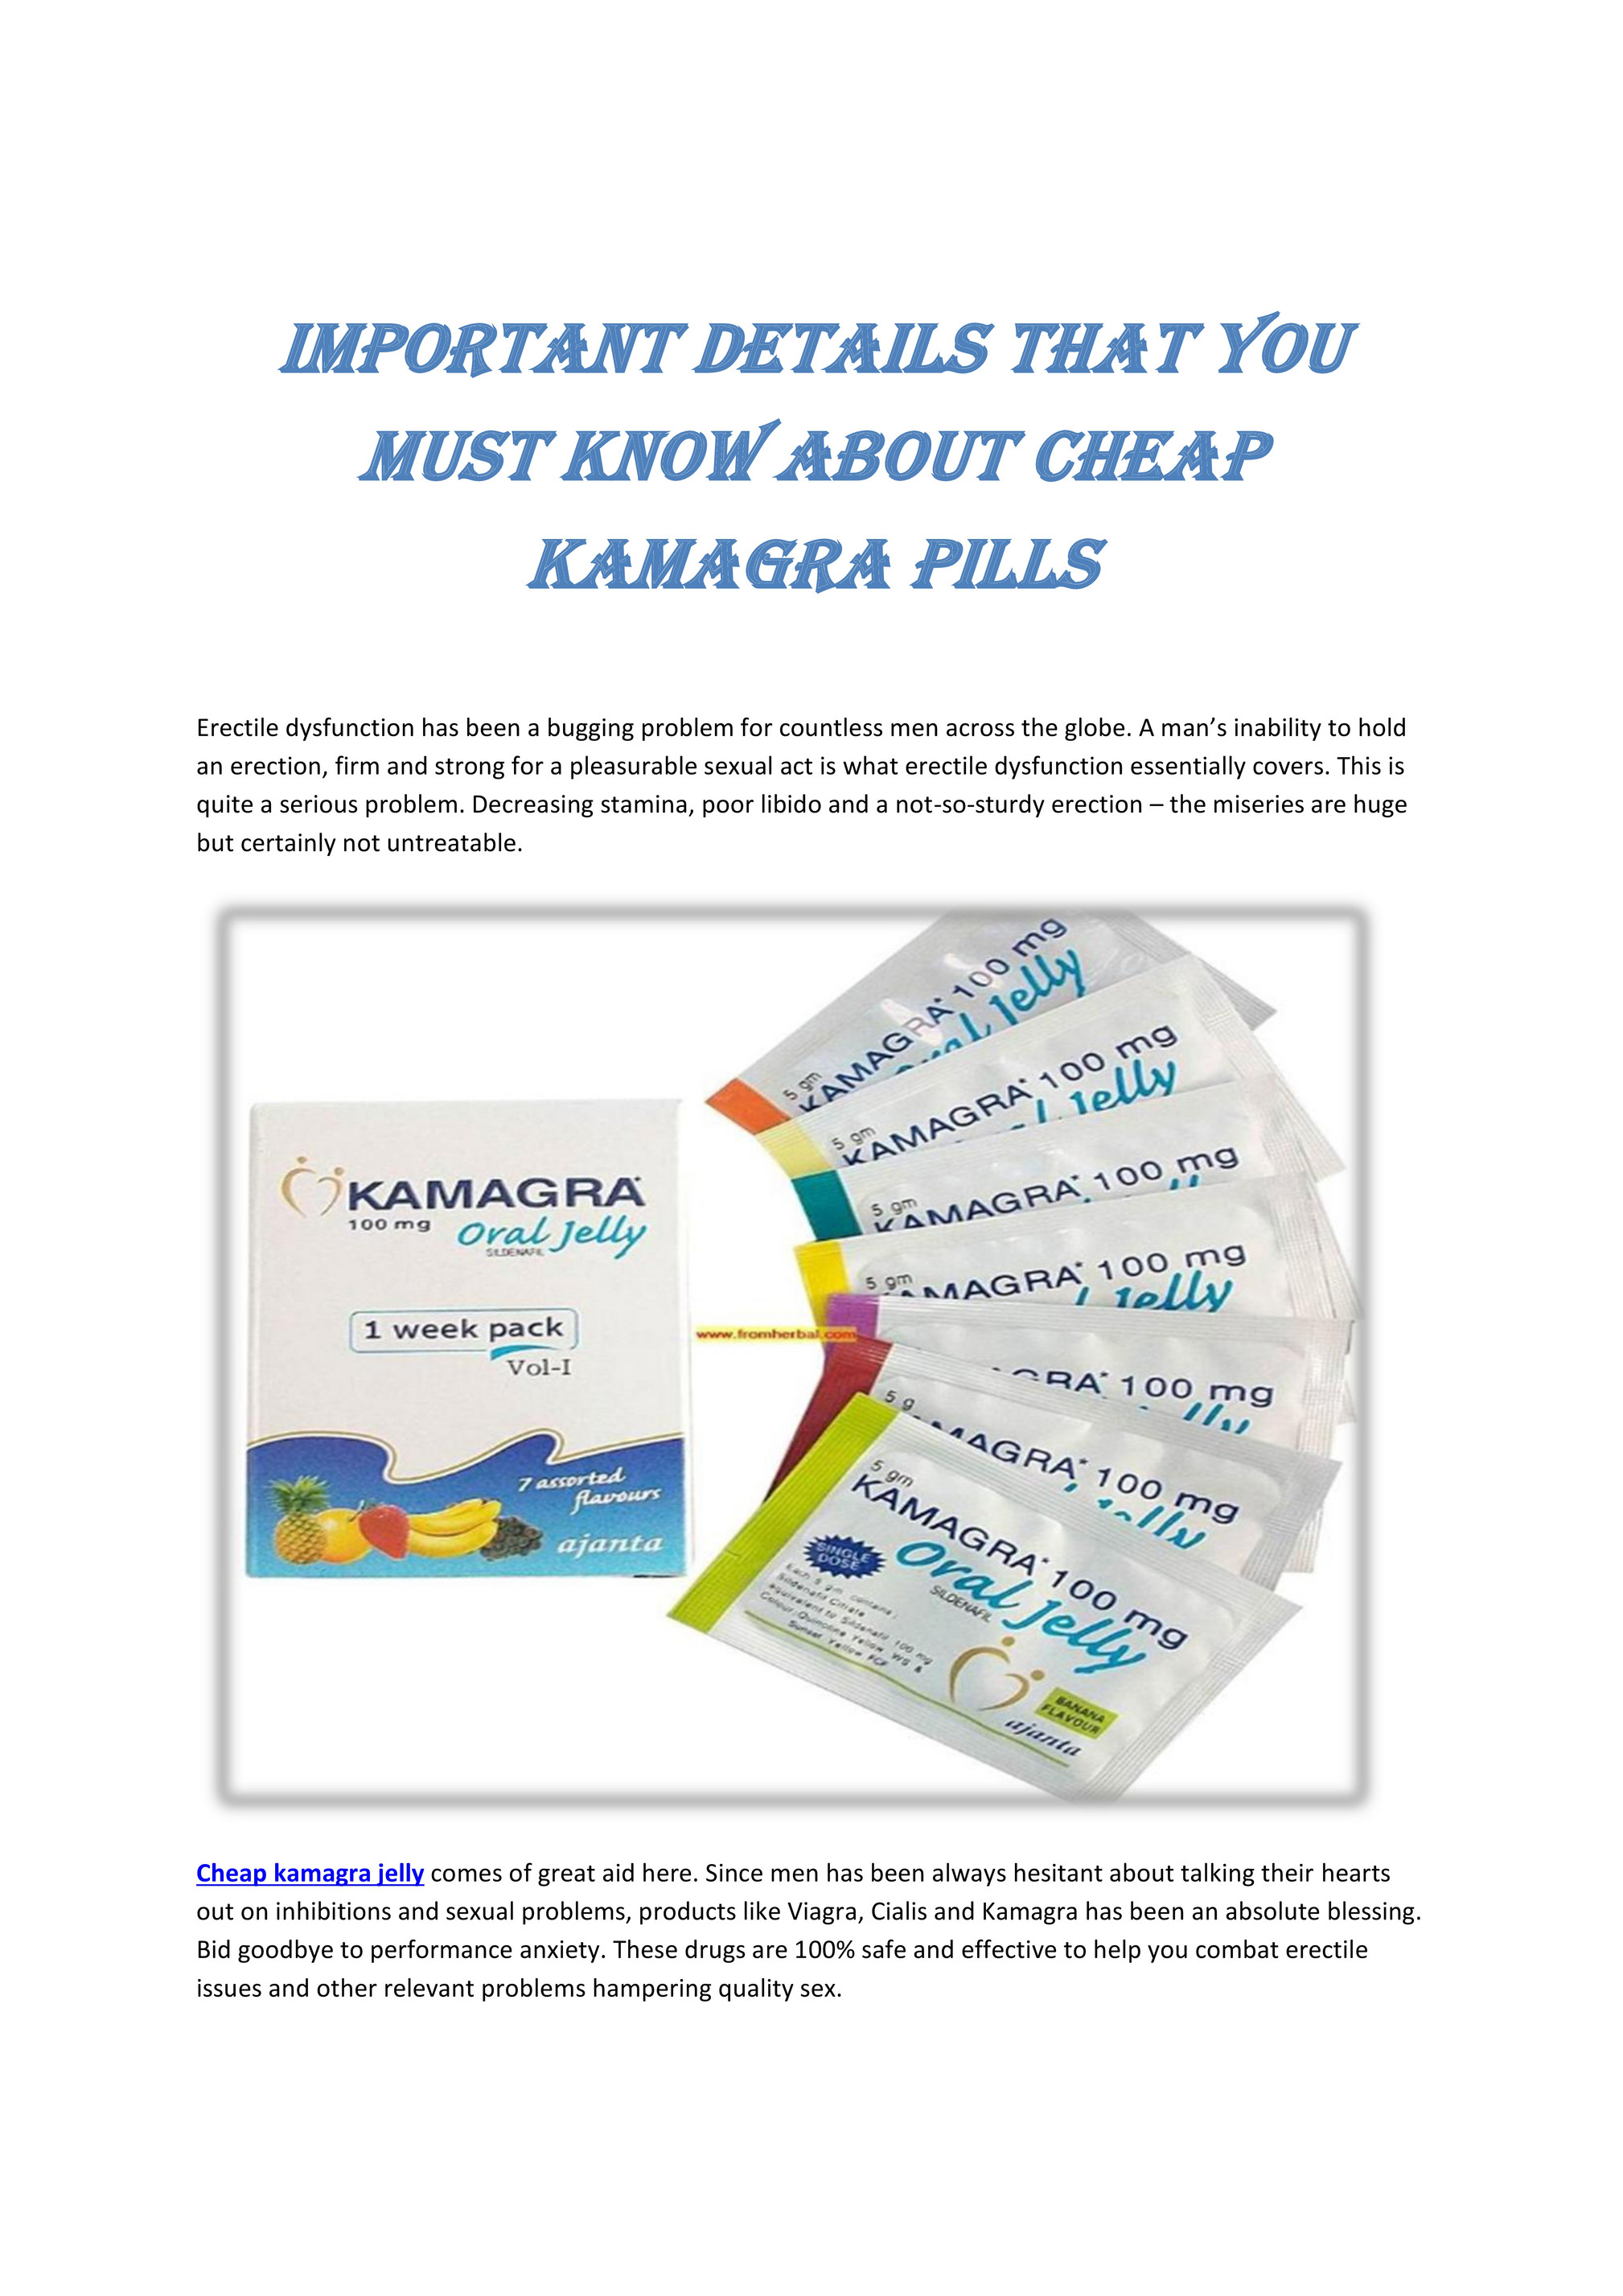 Kamagra Oral Jelly, for Erectile Dysfunction at Best Price in